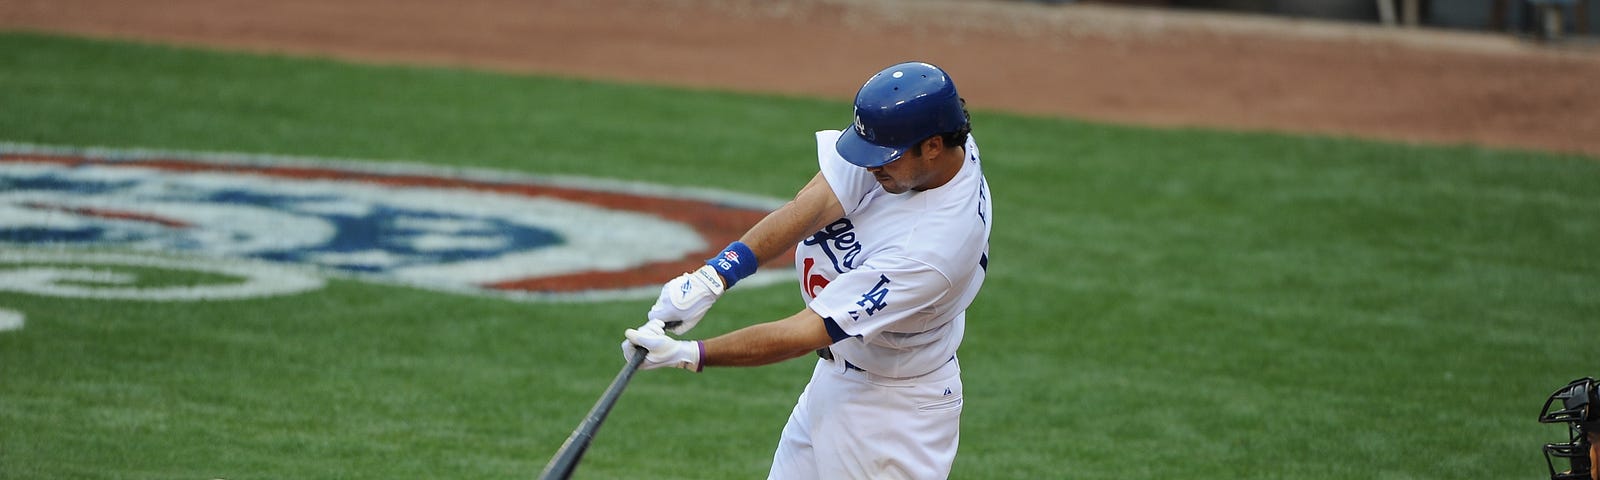 Dodgers will honor Andre Ethier in retirement ceremony August 3